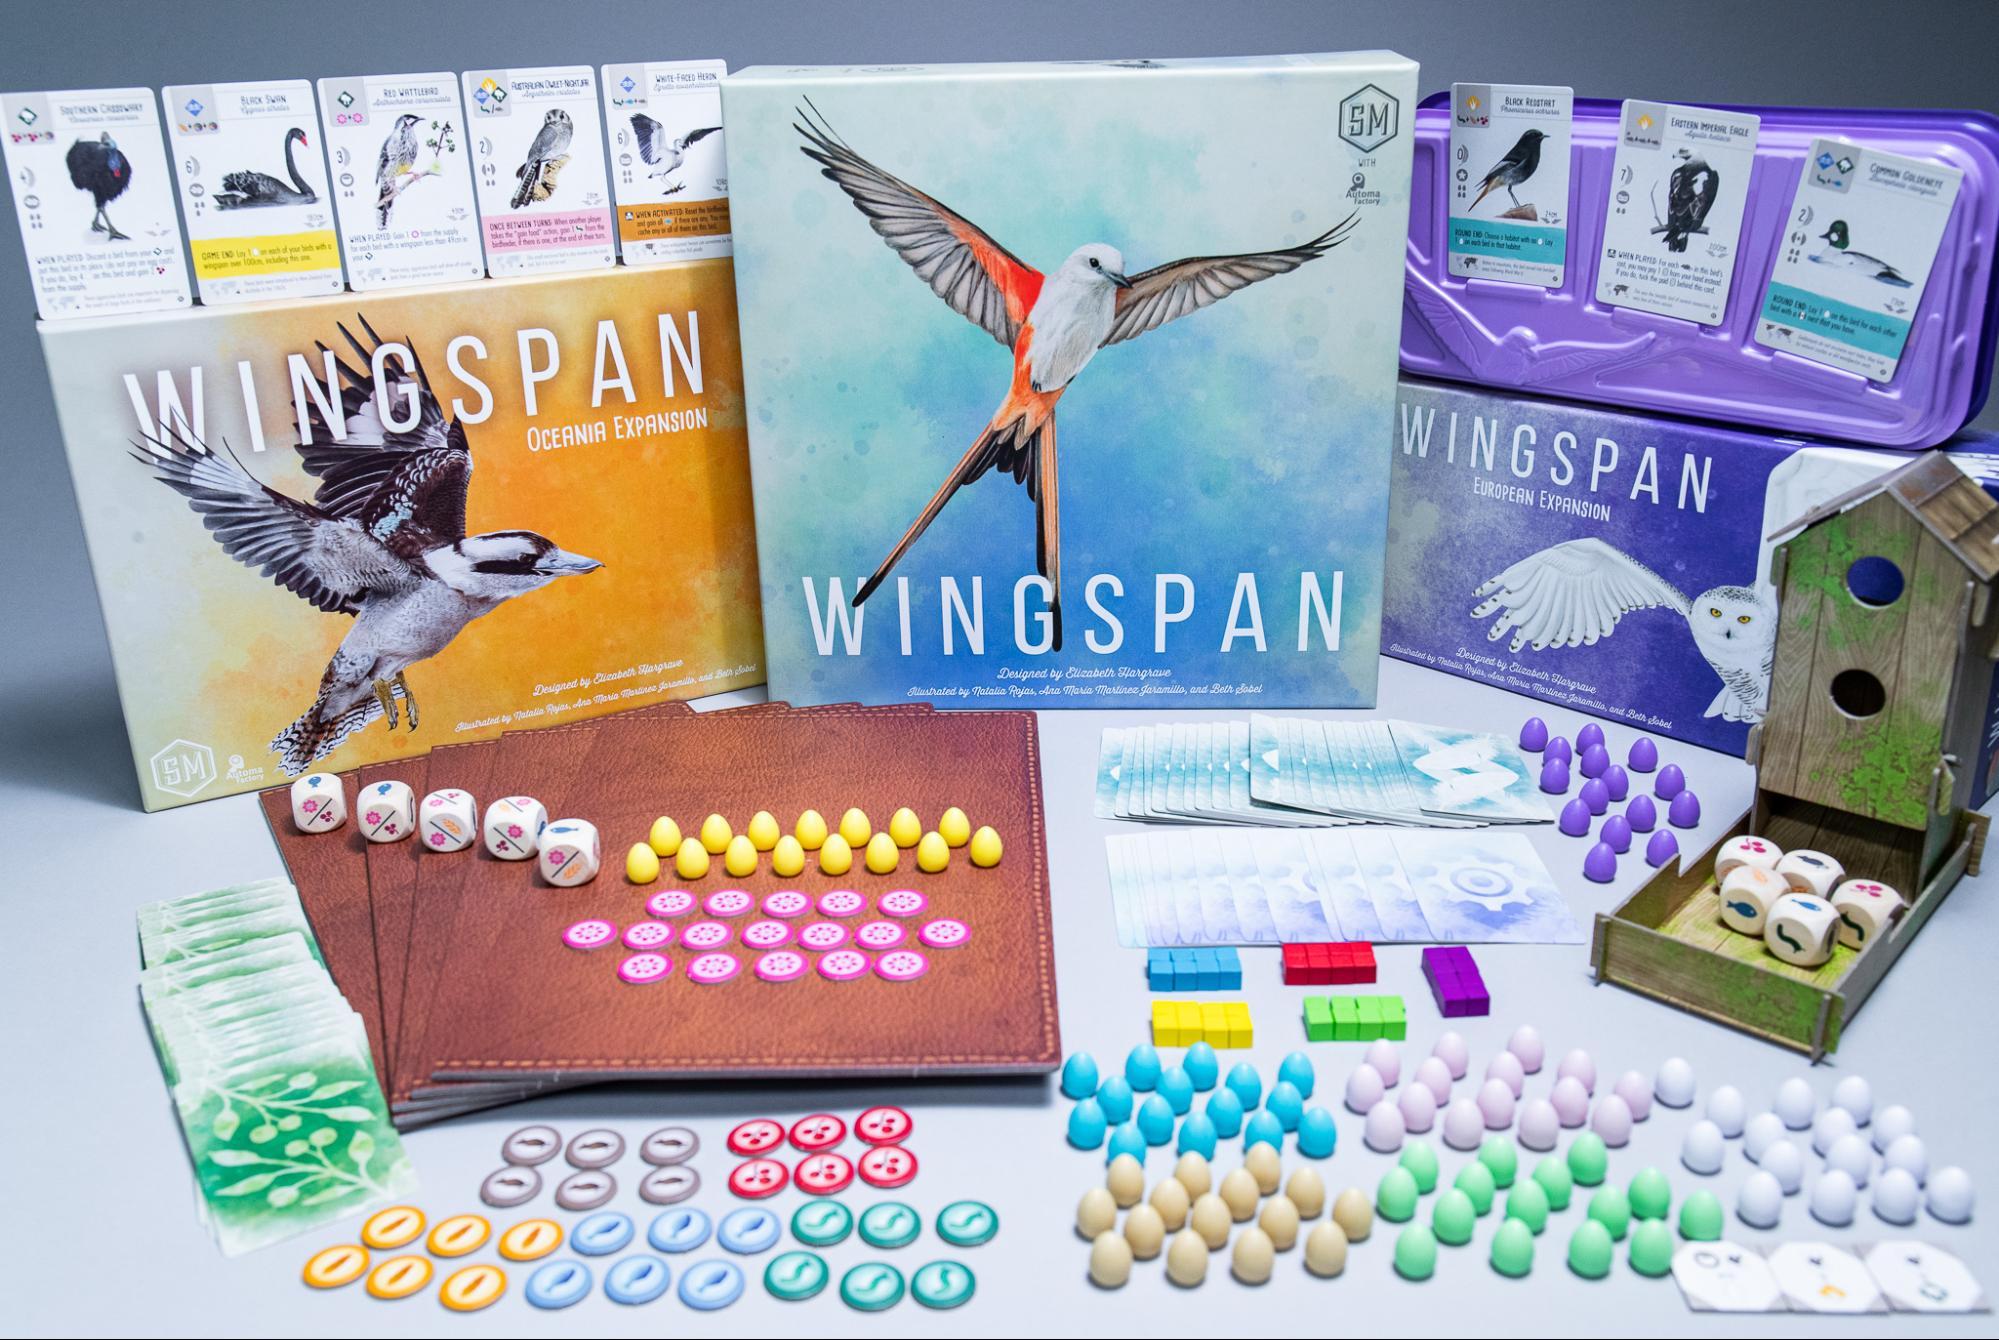 The cult classic board game published by Stonemaier Games called Wingspan along with its expansion packs and game pieces. 